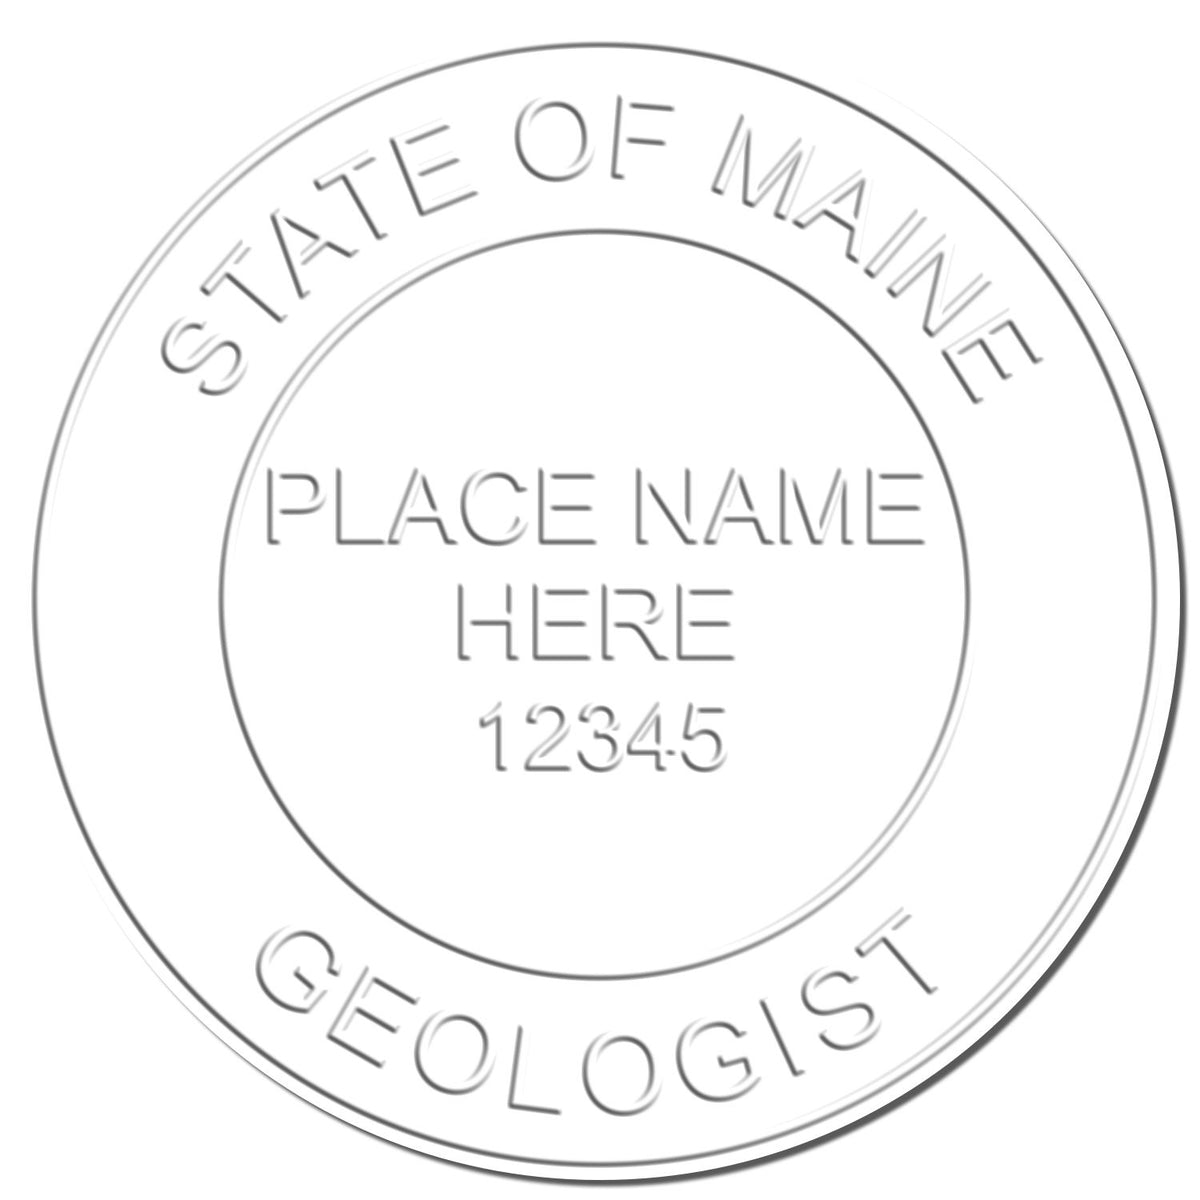 A stamped imprint of the Gift Maine Geologist Seal in this stylish lifestyle photo, setting the tone for a unique and personalized product.